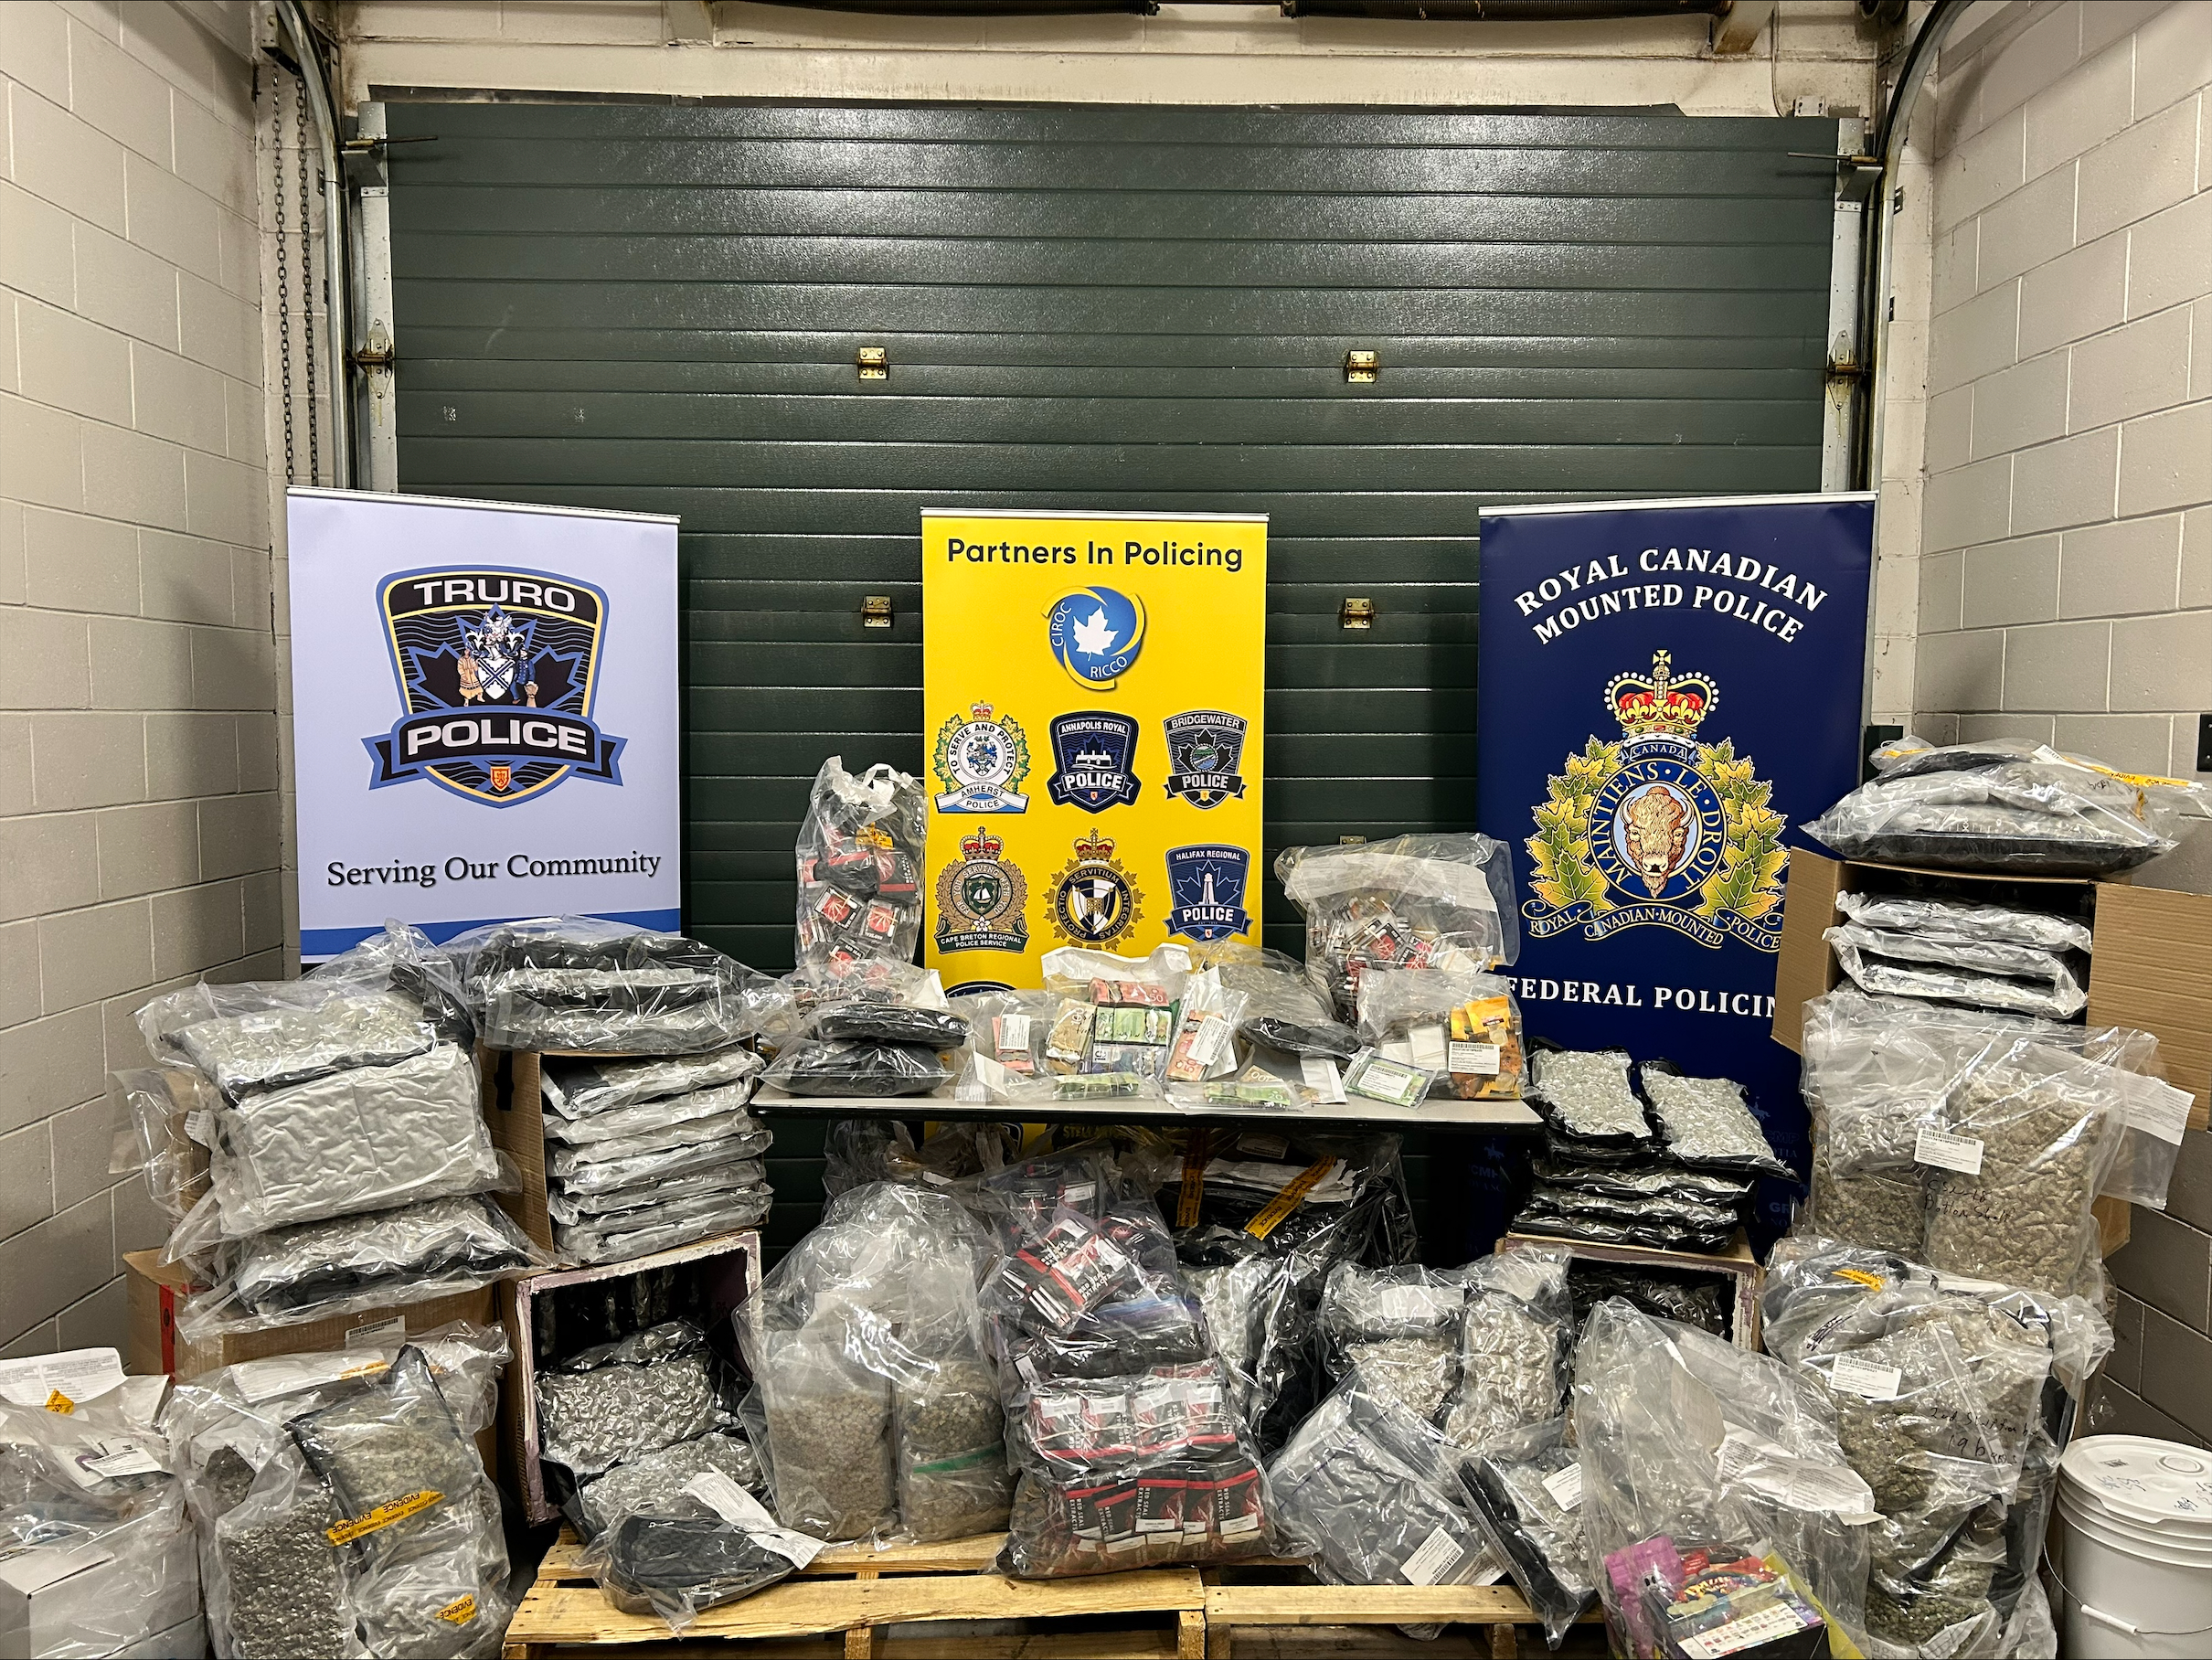 ‘Disruption of a crime group’: Over $1 million worth of drugs seized in N.S., police say